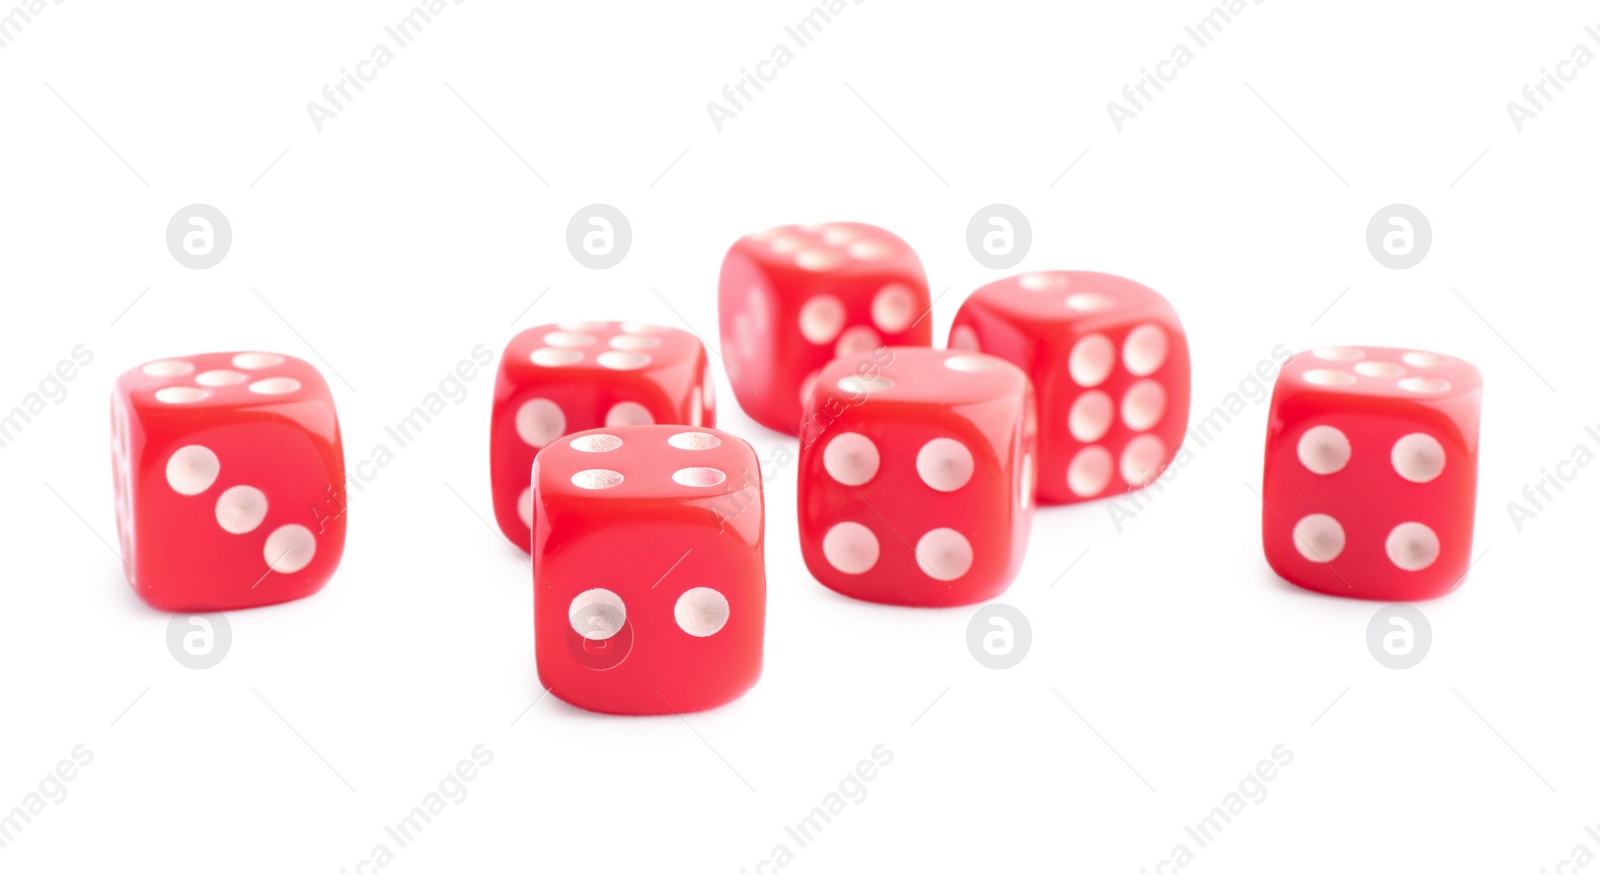 Photo of Many red game dices isolated on white